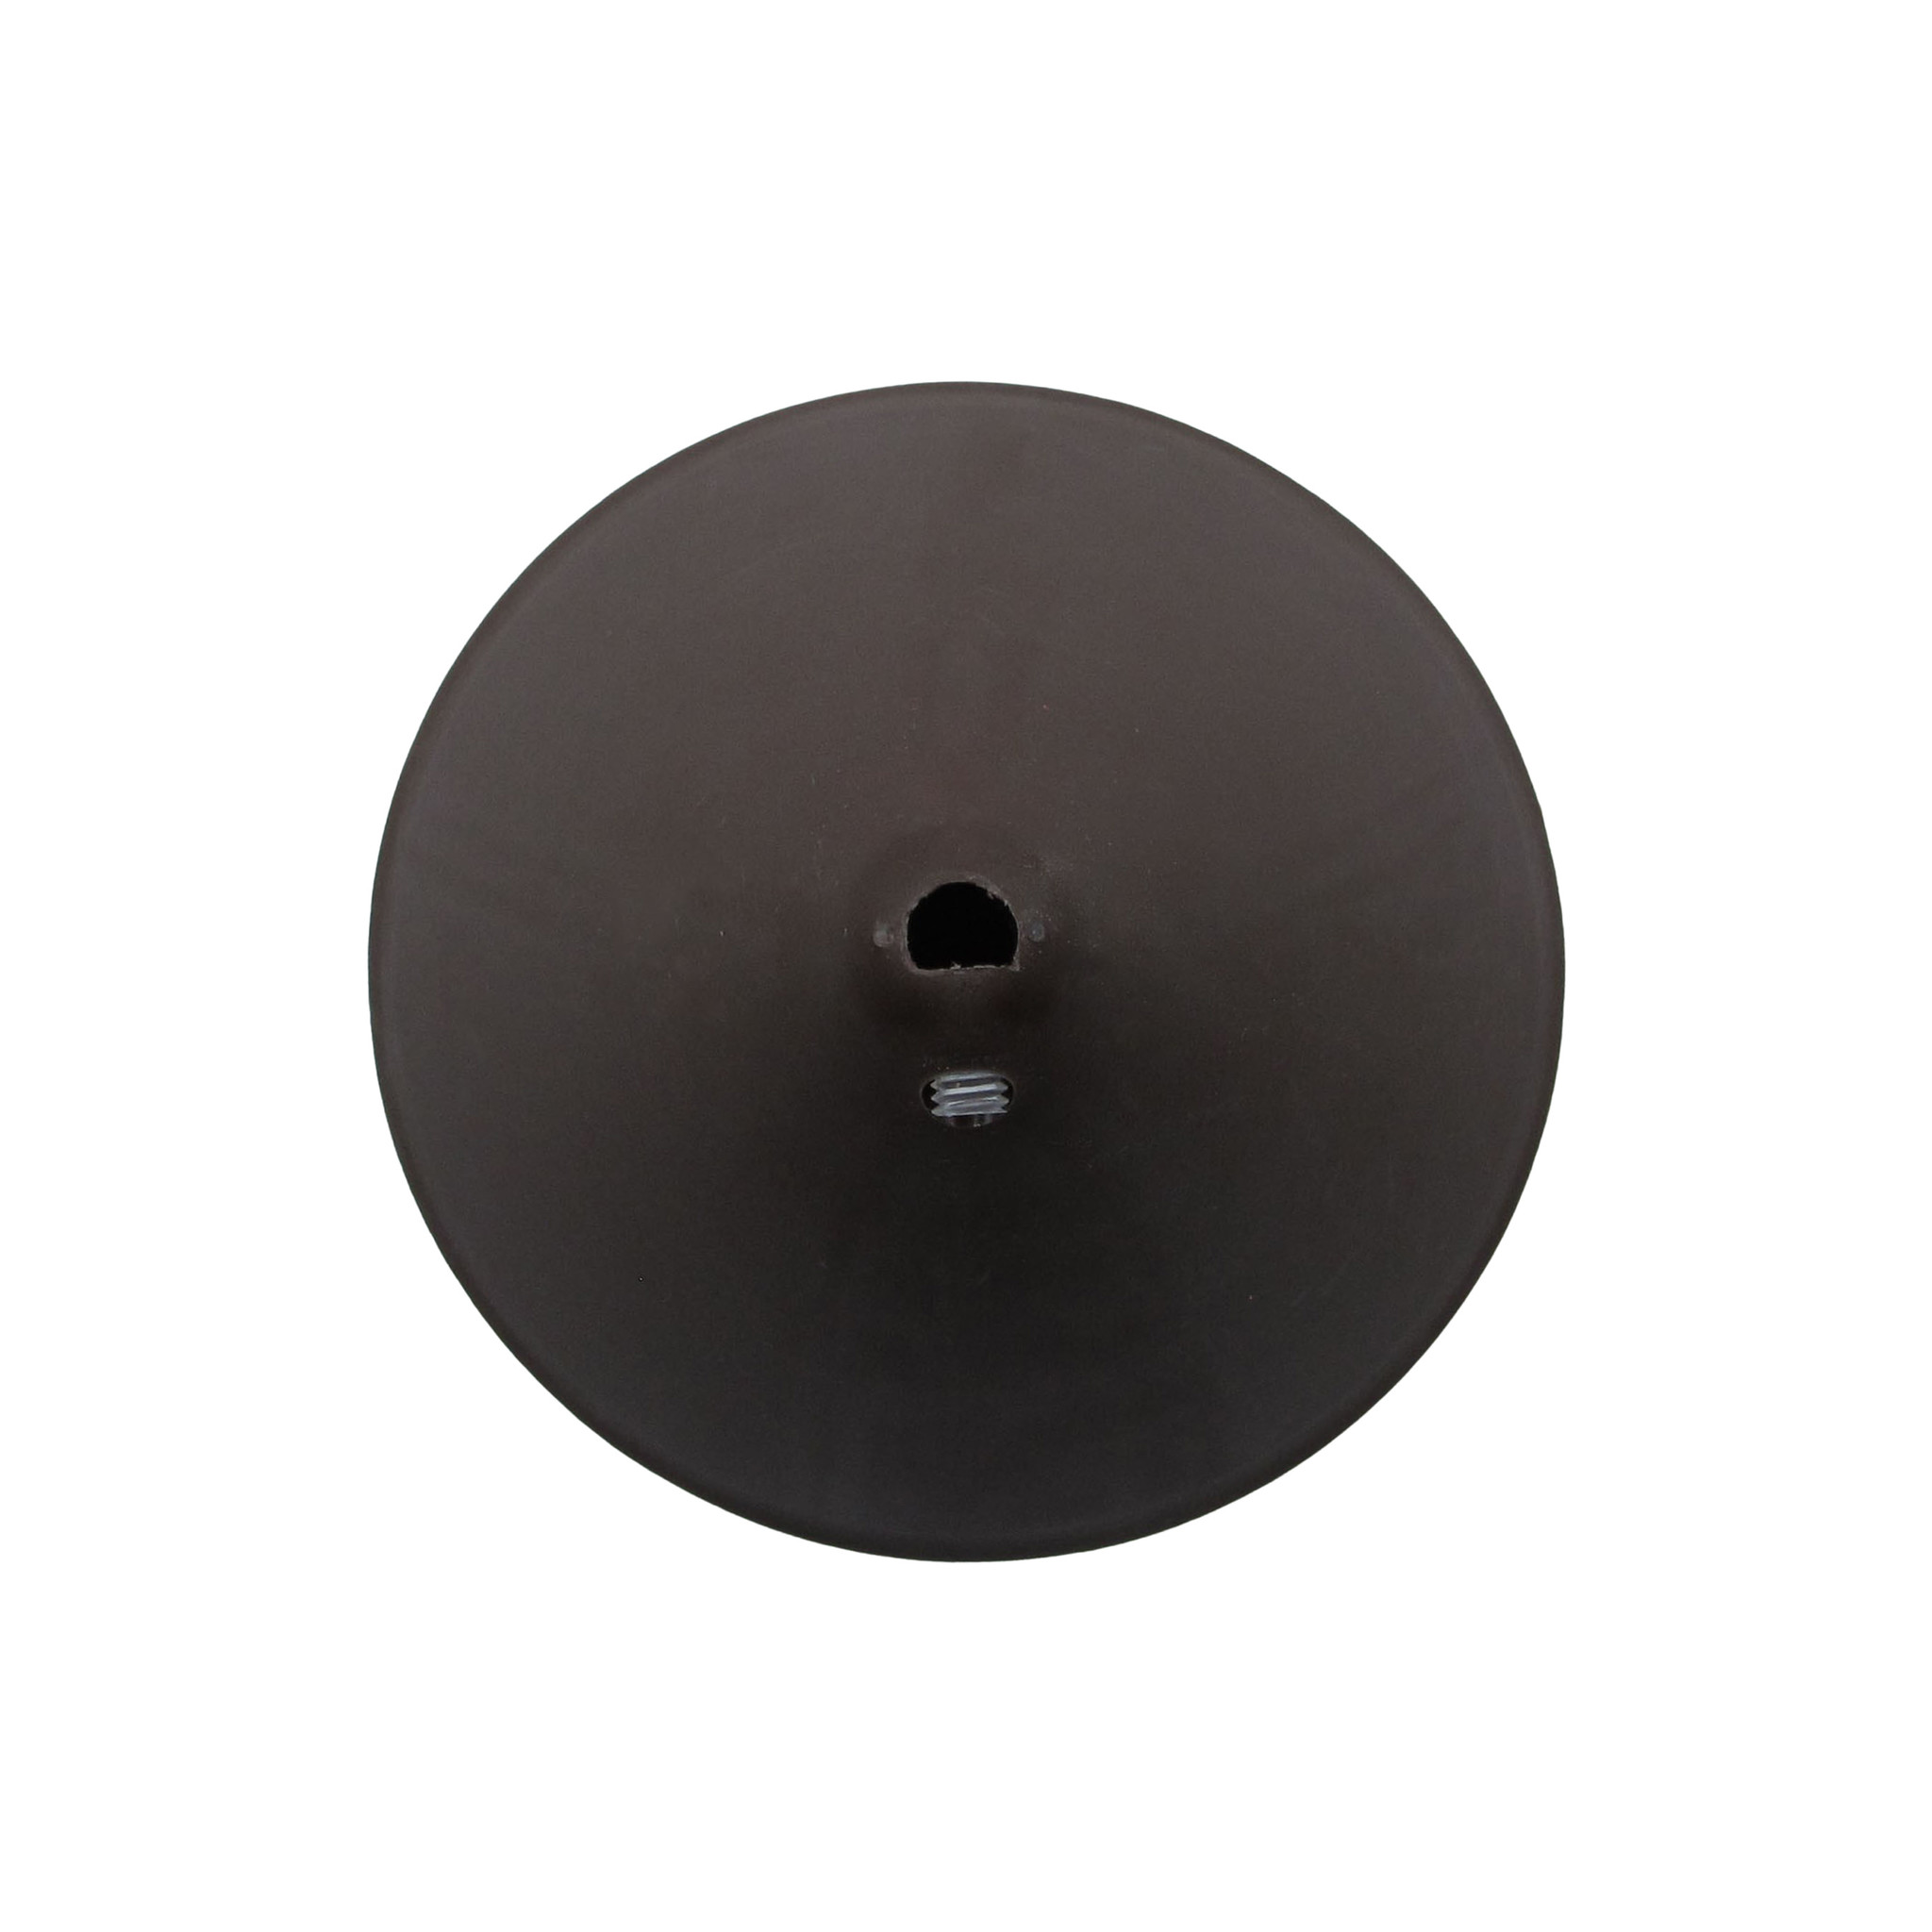 Ceiling rose plastic conical 'Axell' - 1 cord - Ø120mm